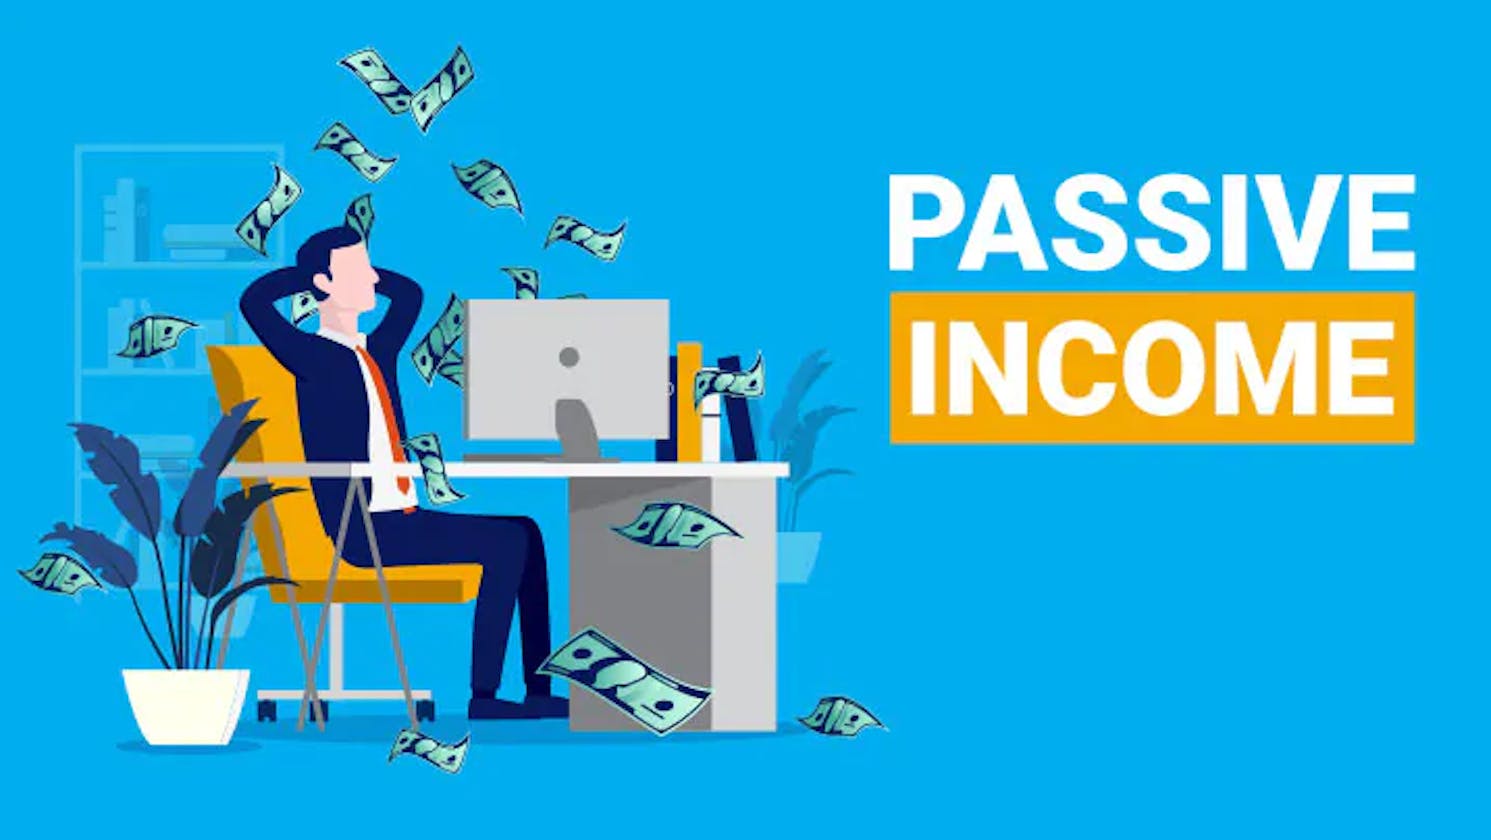 Monetize Your Skills: 10 Stupid Passive Income Ideas for Coders